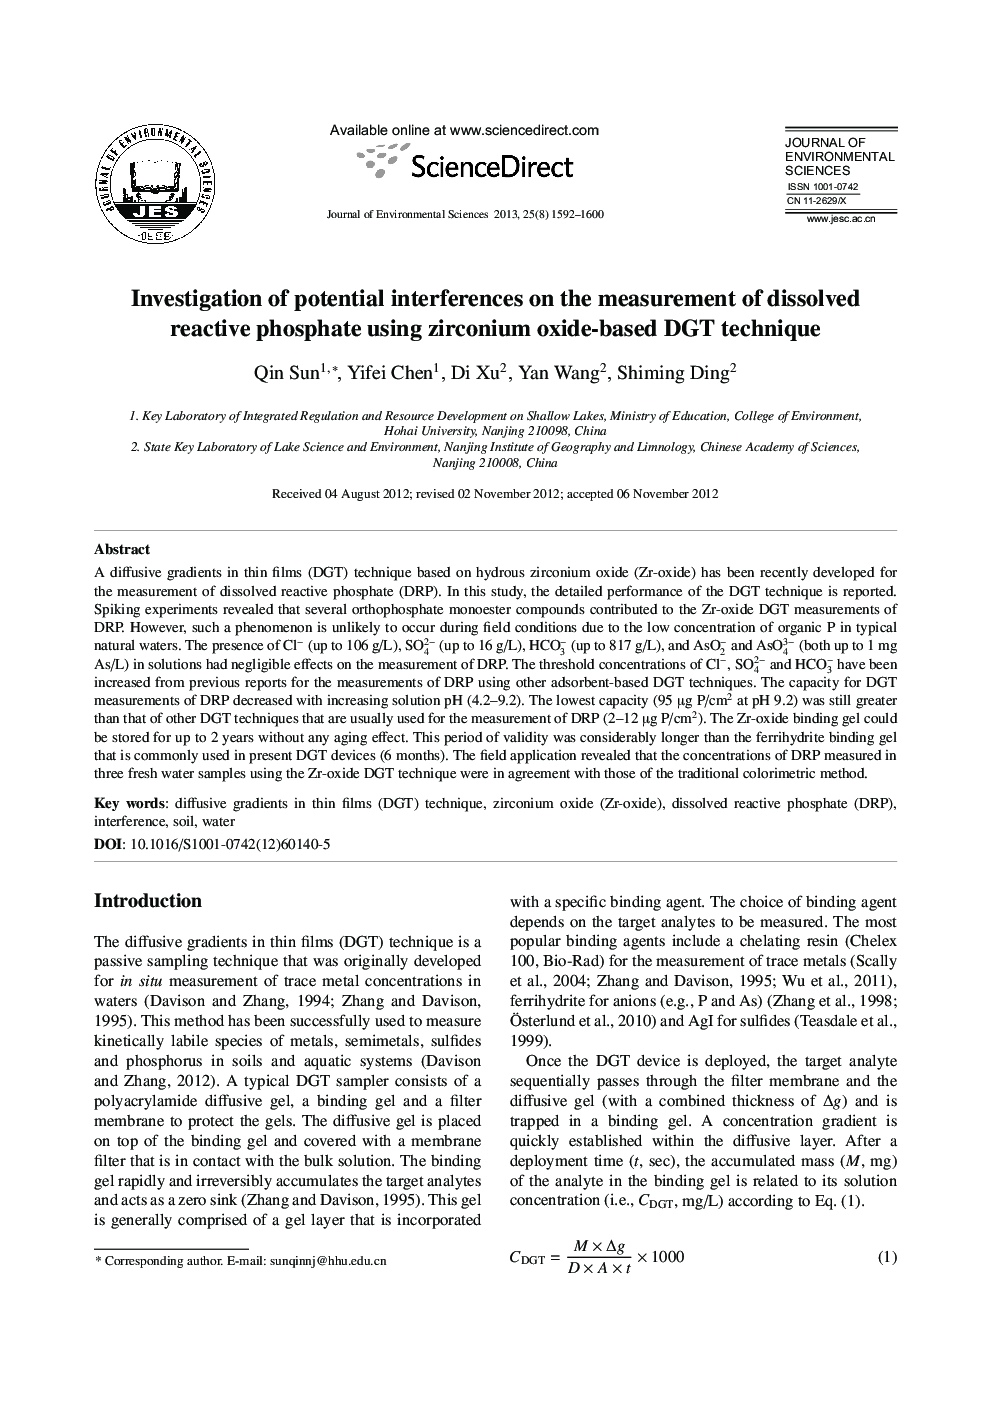 Investigation of potential interferences on the measurement of dissolved reactive phosphate using zirconium oxide-based DGT technique